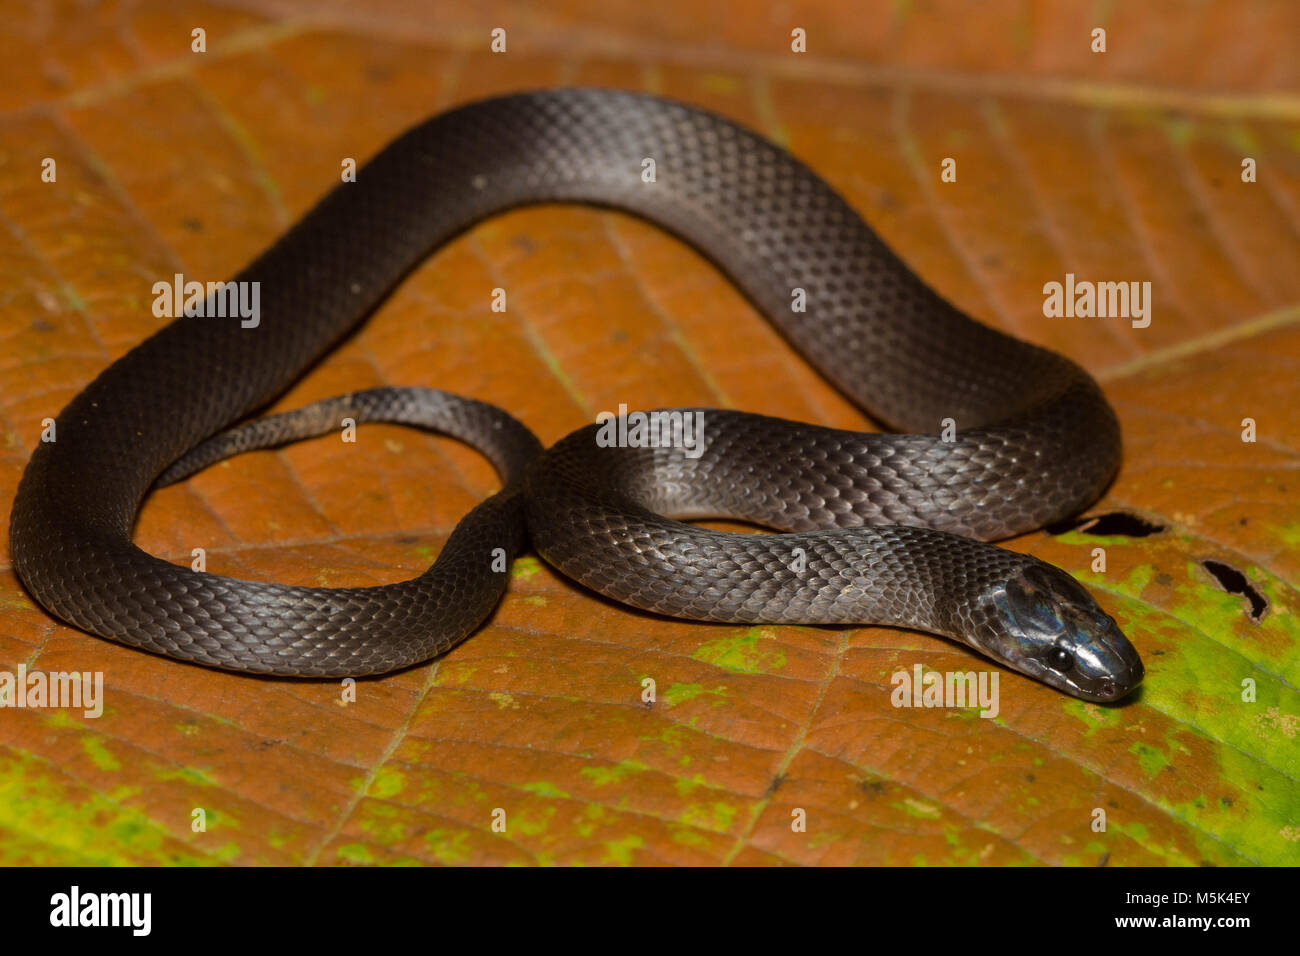 A small and harmless species of snake from Ecaudor.  This is a coffee snake (Ninia atrata). Stock Photo